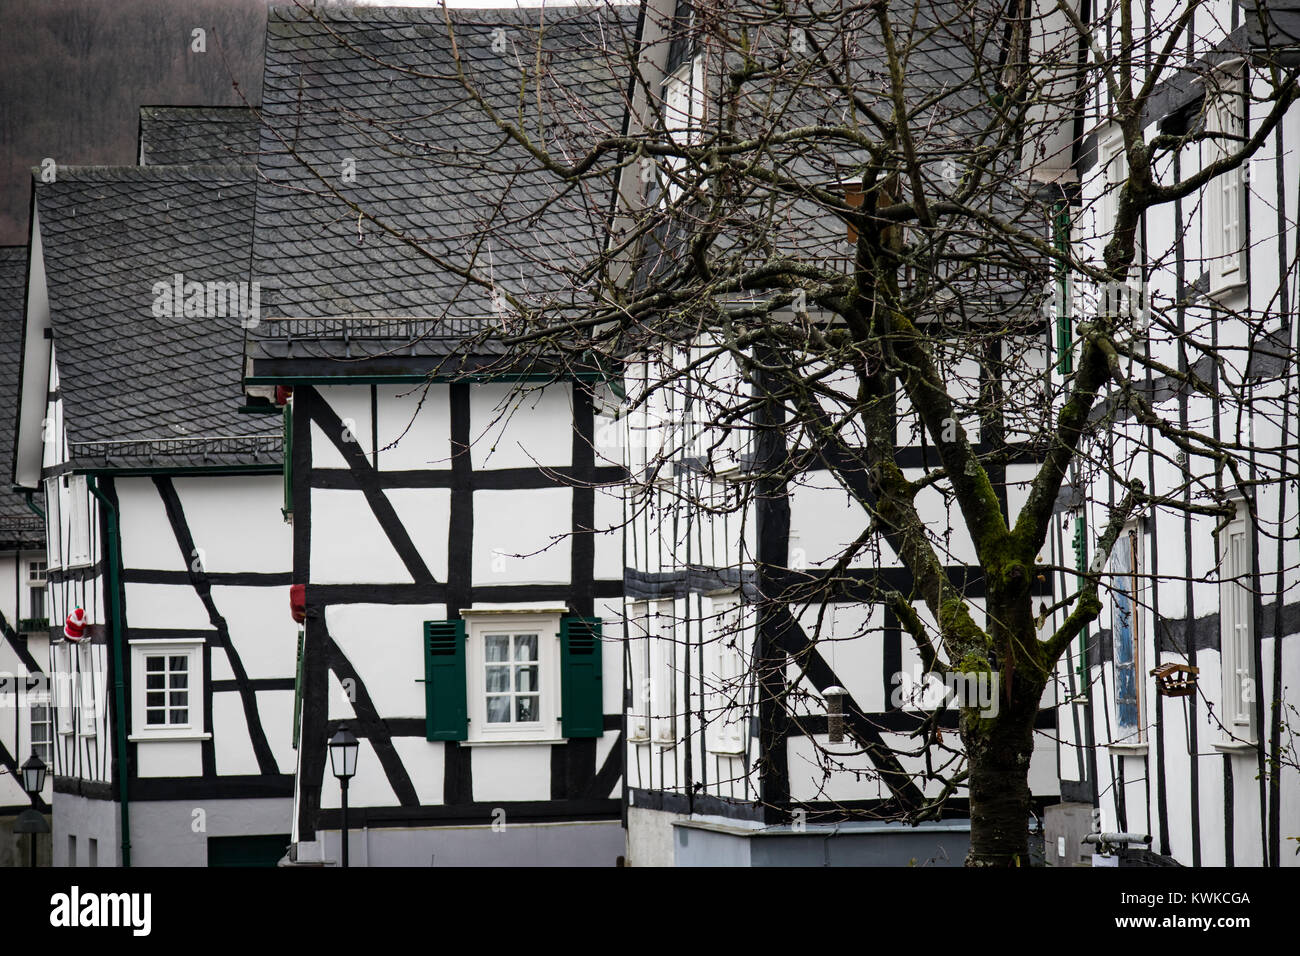 historical old town of Freudenberg, North Rhine-Westphalia, Germany, with half-timbered houses, Alter Flecken Stock Photo